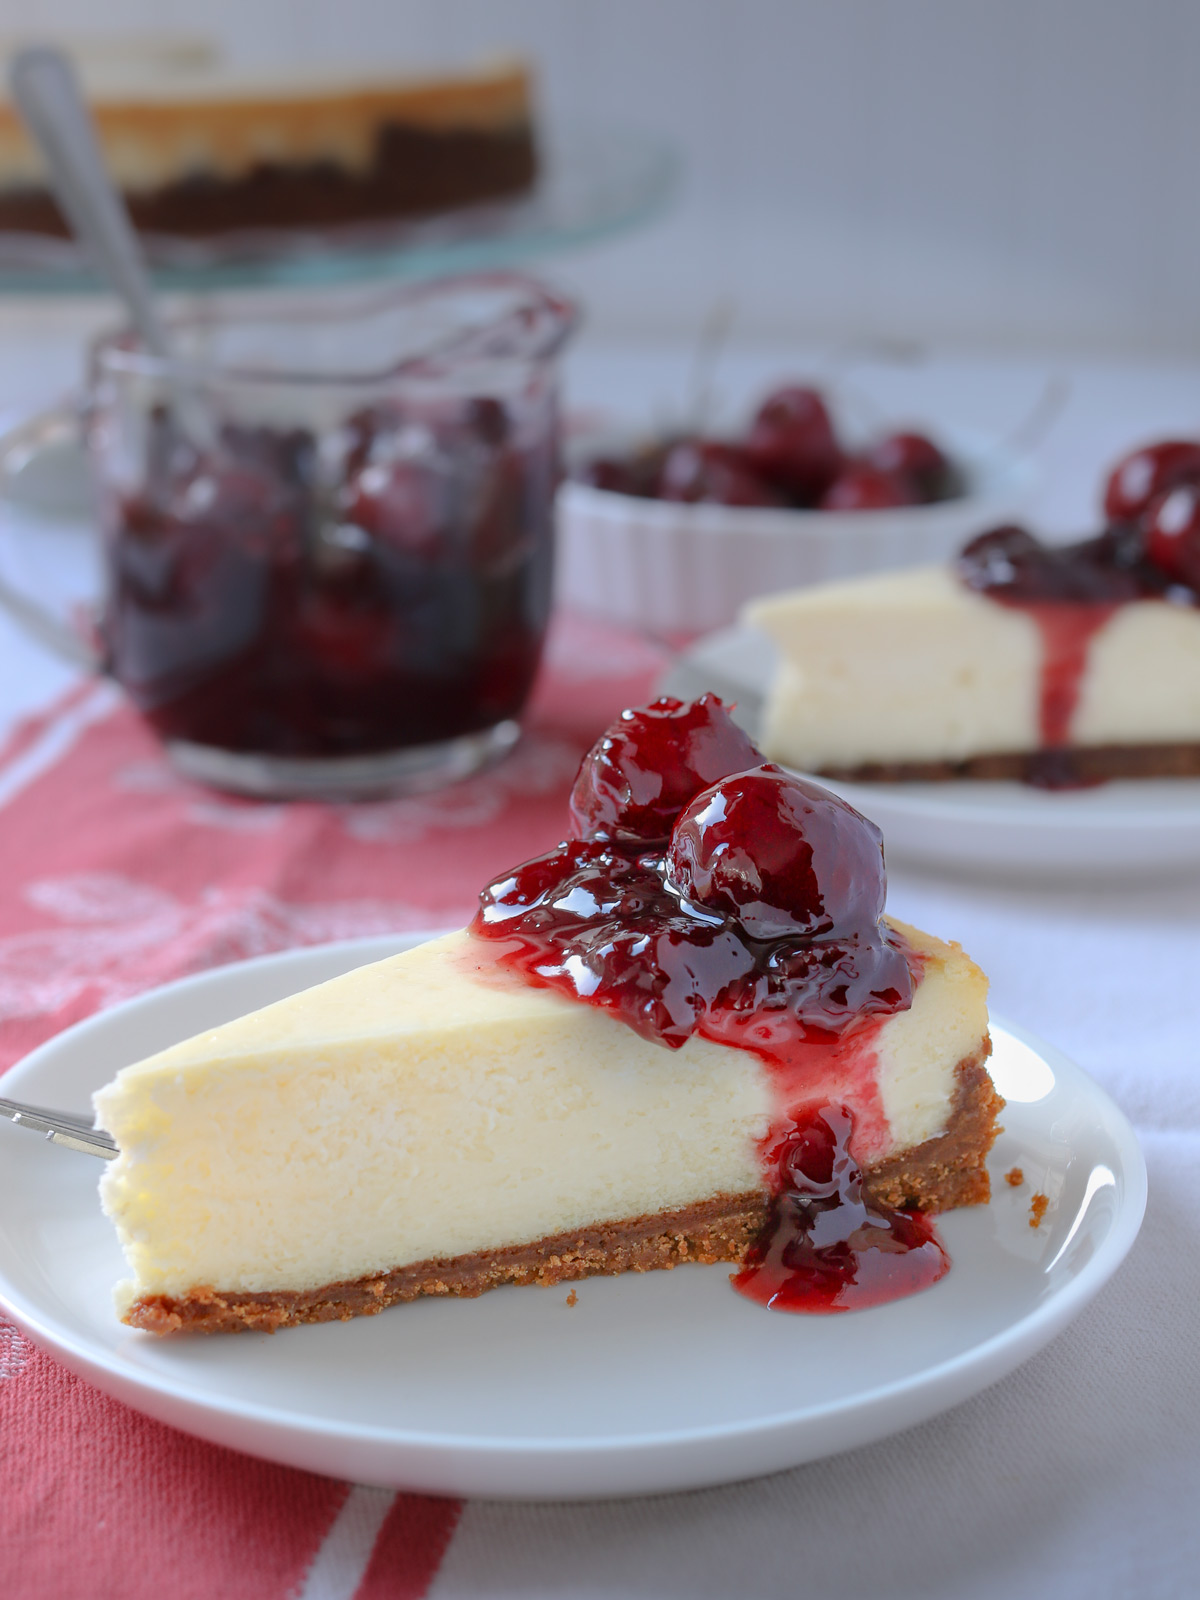 slices of cherry cheesecake on dessert plates with red cloth on table.